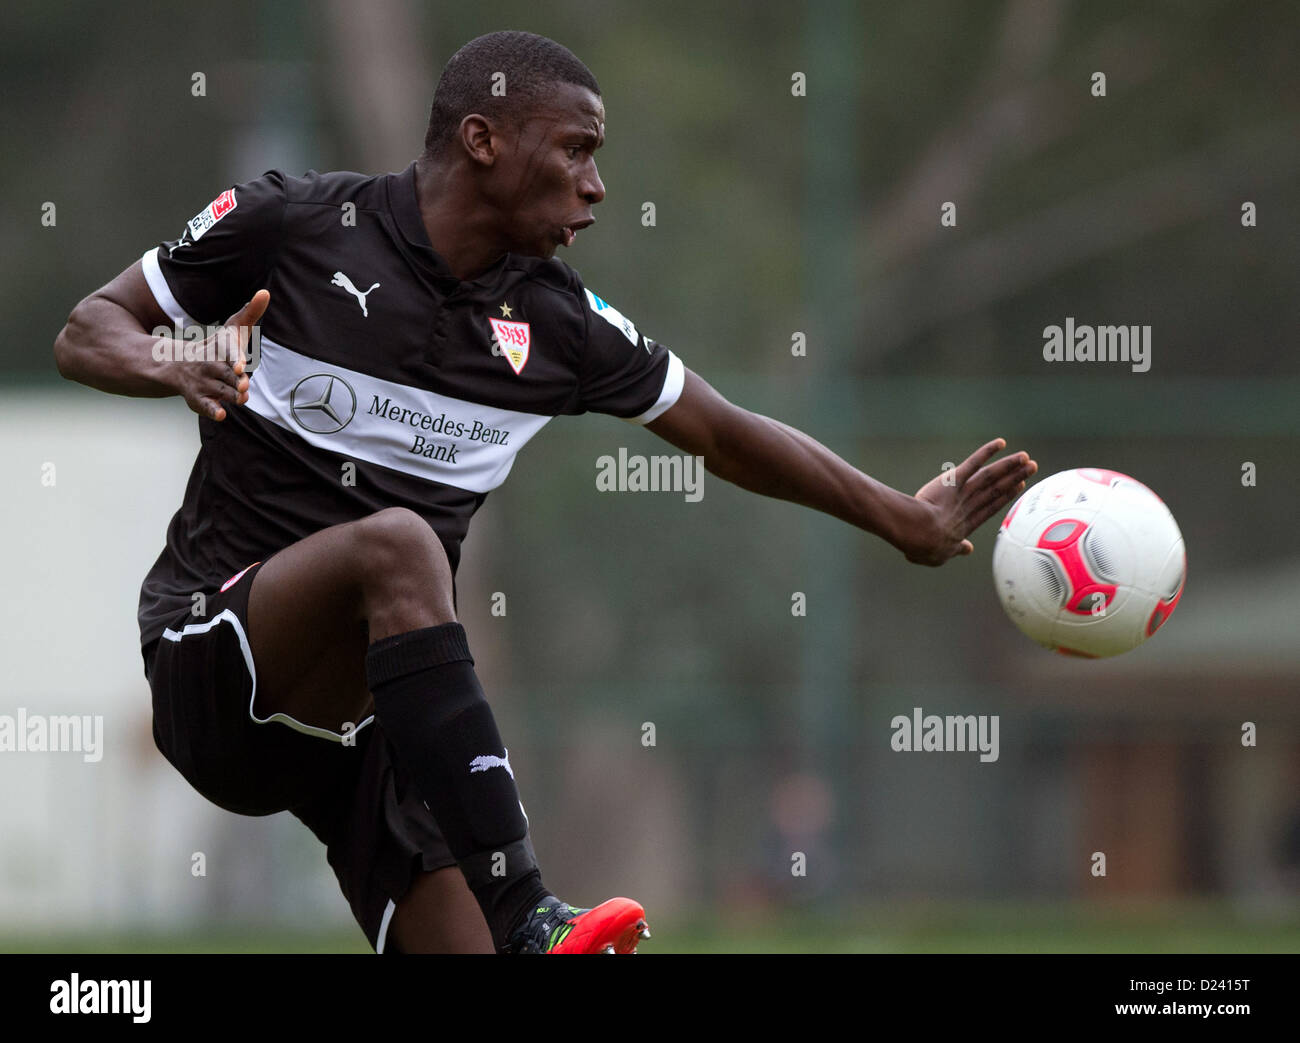 Stuttgart's Antonio Ruediger receives the ball during the friendly soccer match between Bundesliga soccer club VfB Stuttgart and Dutch Eredivisie soccer club RKC Waalwijk in Kardiye, Turkey, 11 January 2013. VfB Stuttgart ended their training camp with the match which ended 1-1 undecided. Photo: SOEREN STACHE Stock Photo